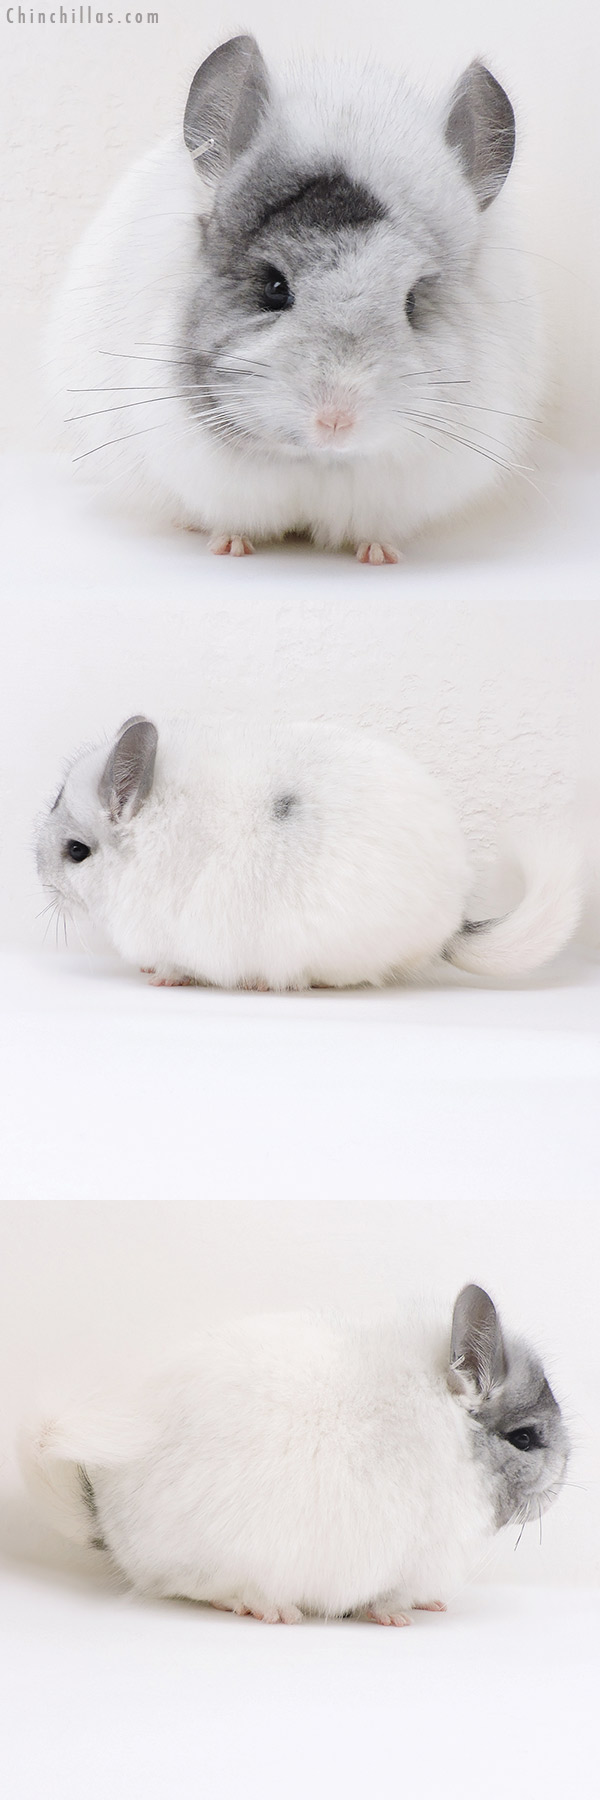 Chinchilla or related item offered for sale or export on Chinchillas.com - 17181 Unique White Mosaic  Royal Persian Angora Female Chinchilla